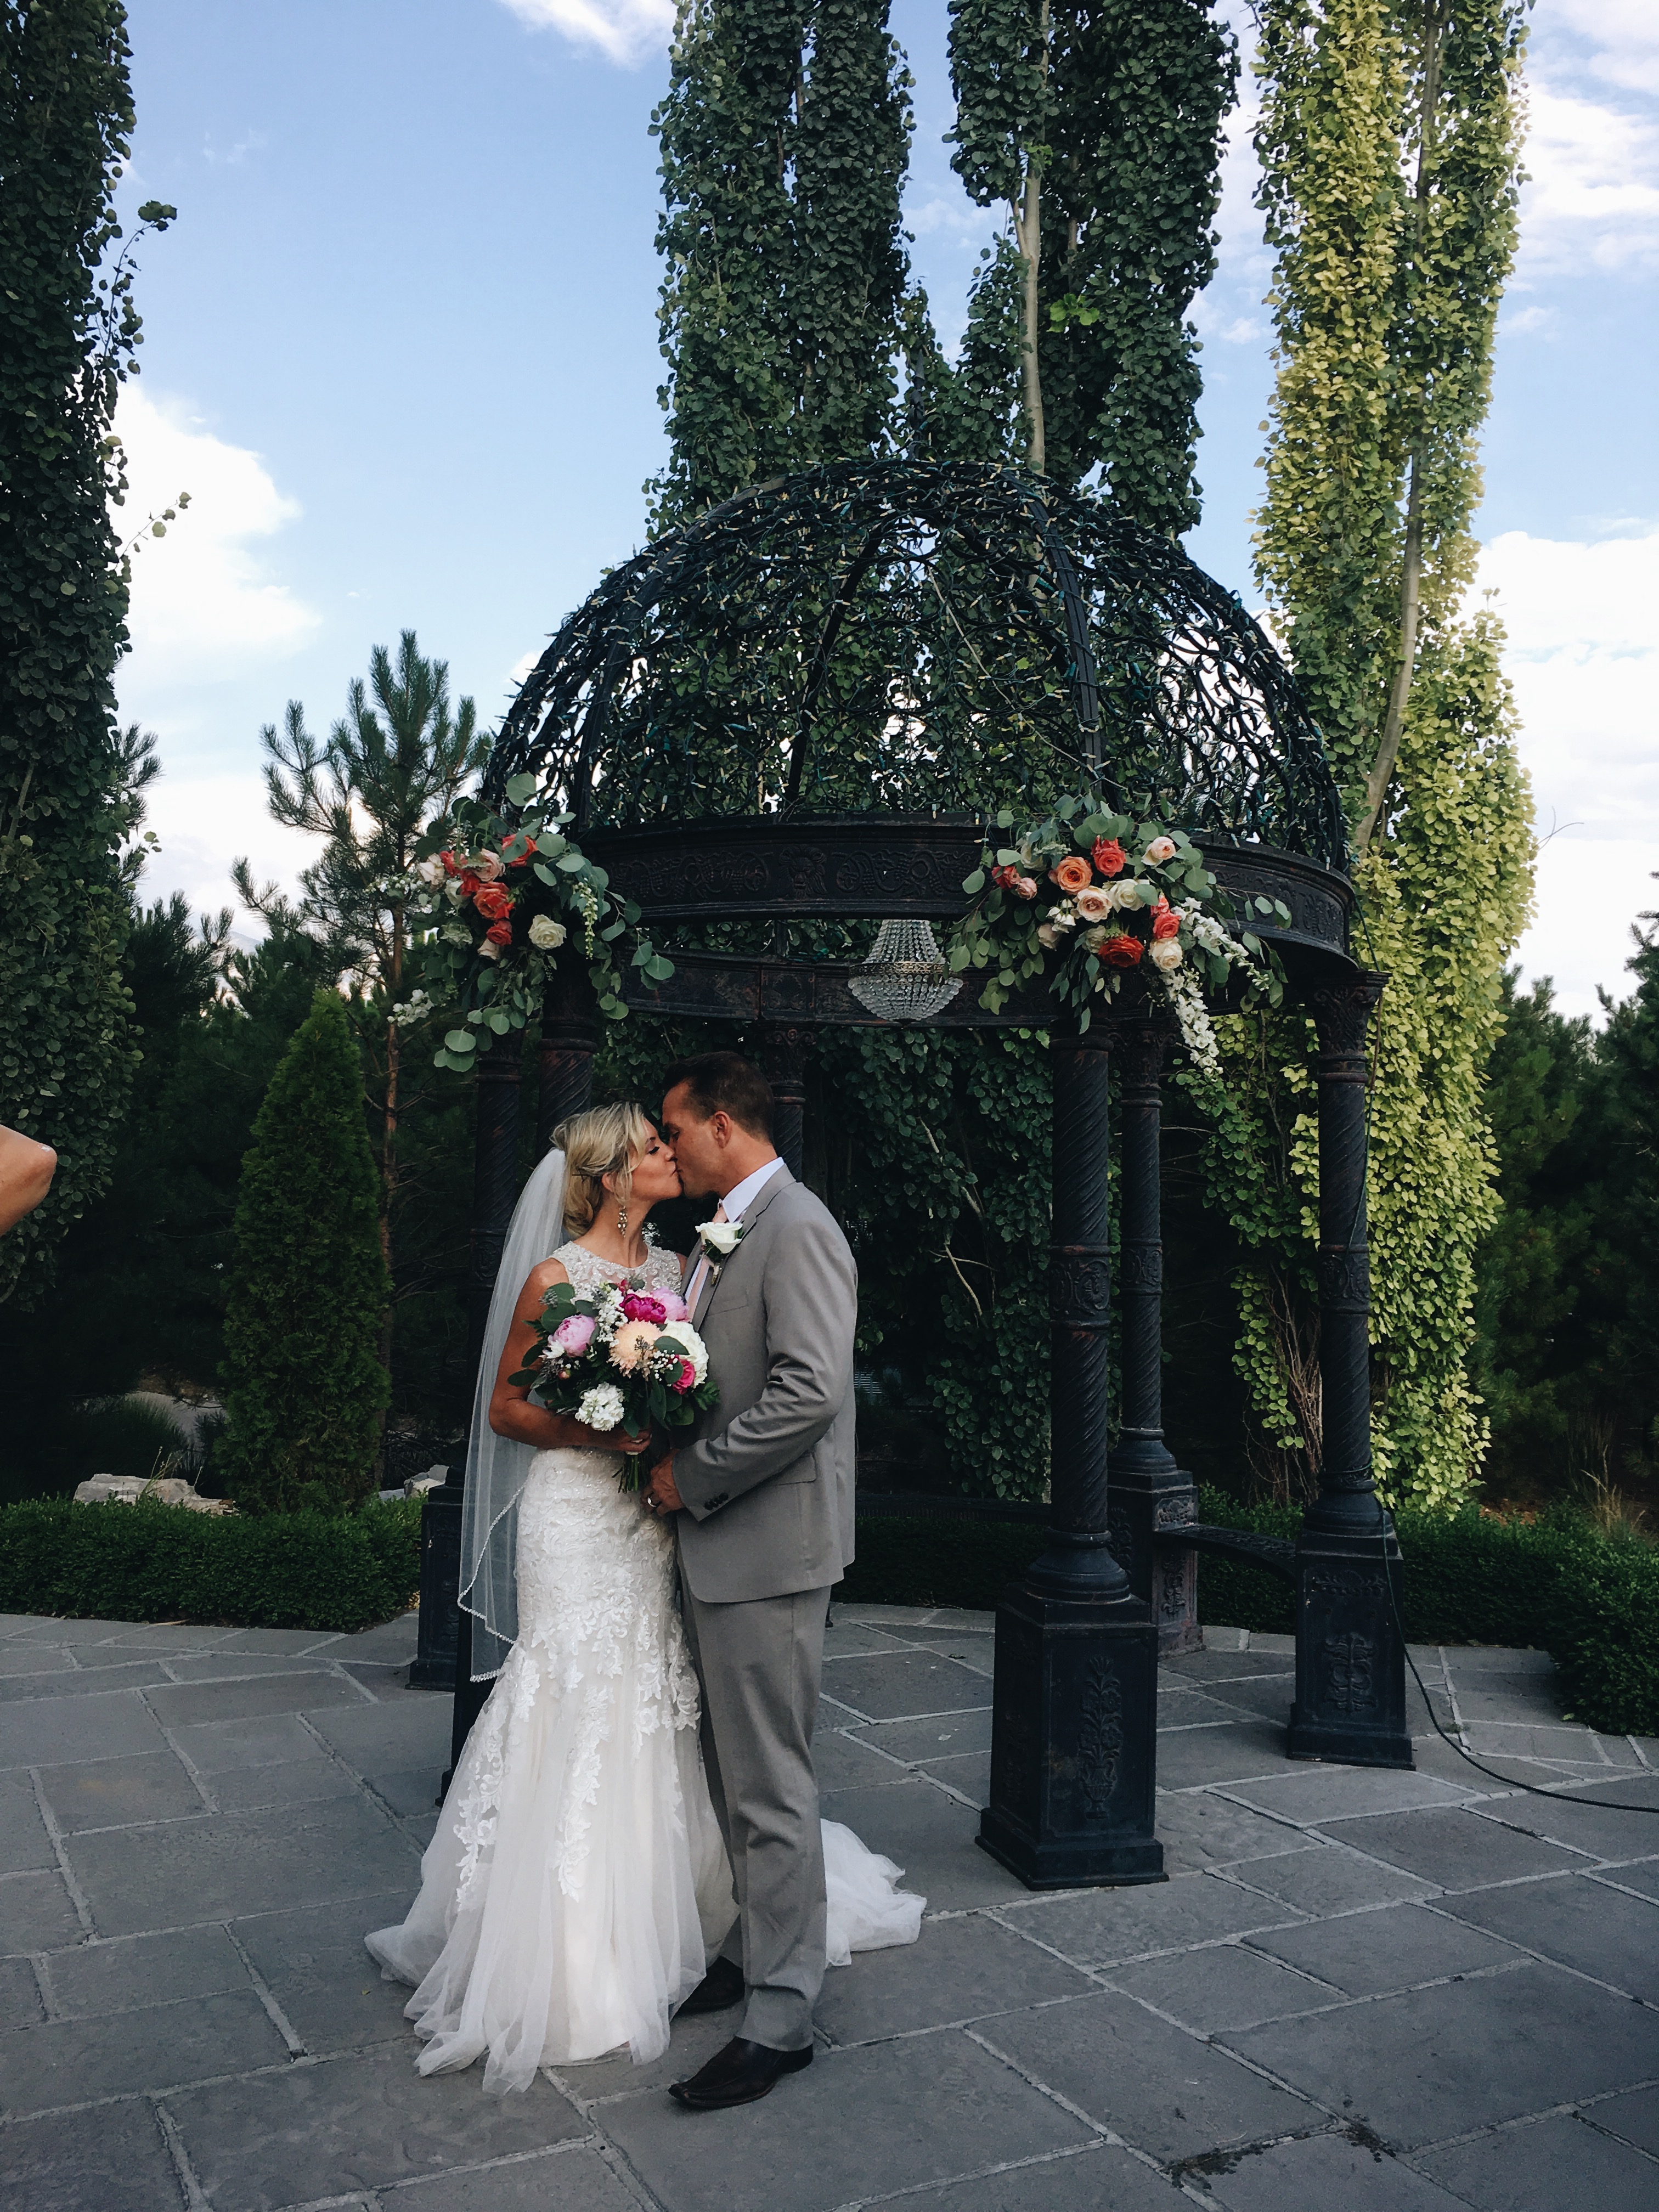 Family Wedding: Jeff & Kim Tie The Knot by social media influencer Ginger Parrish